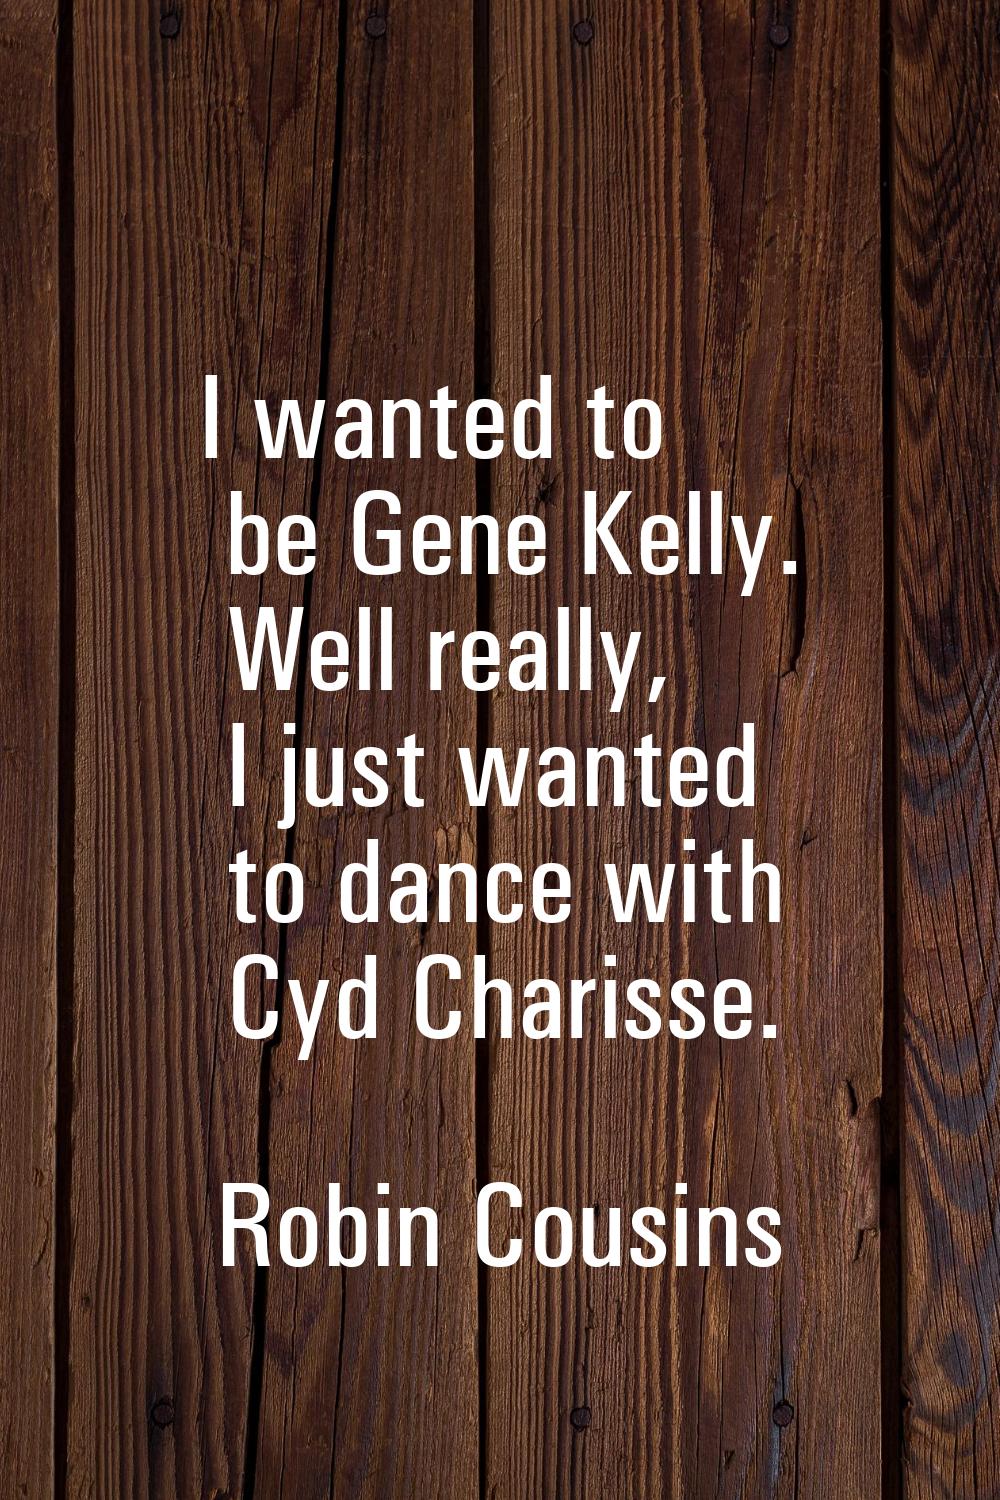 I wanted to be Gene Kelly. Well really, I just wanted to dance with Cyd Charisse.